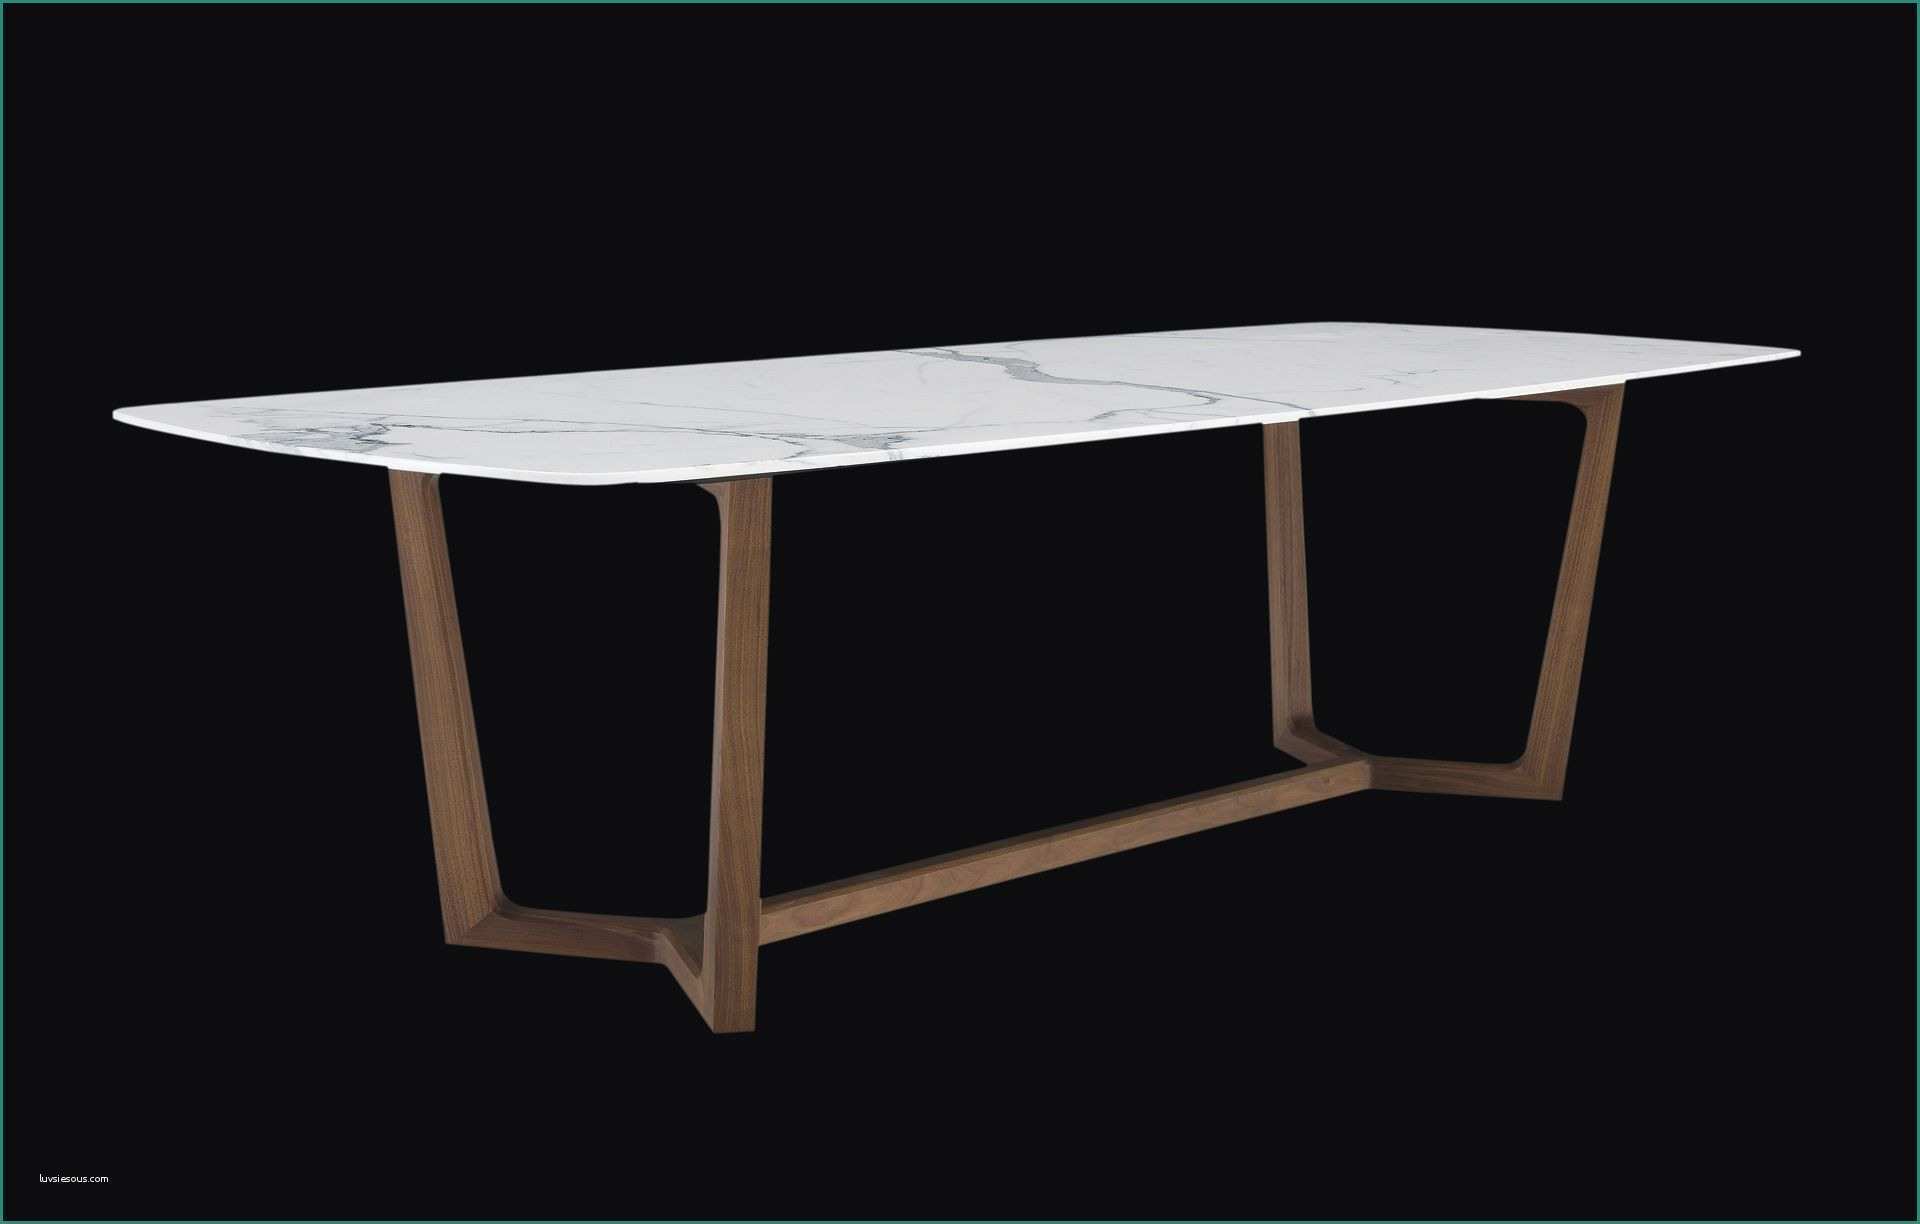 Palladiana Di Travertino E Contemporary Wood and Marble Dining Table Concorde by Emmanuel